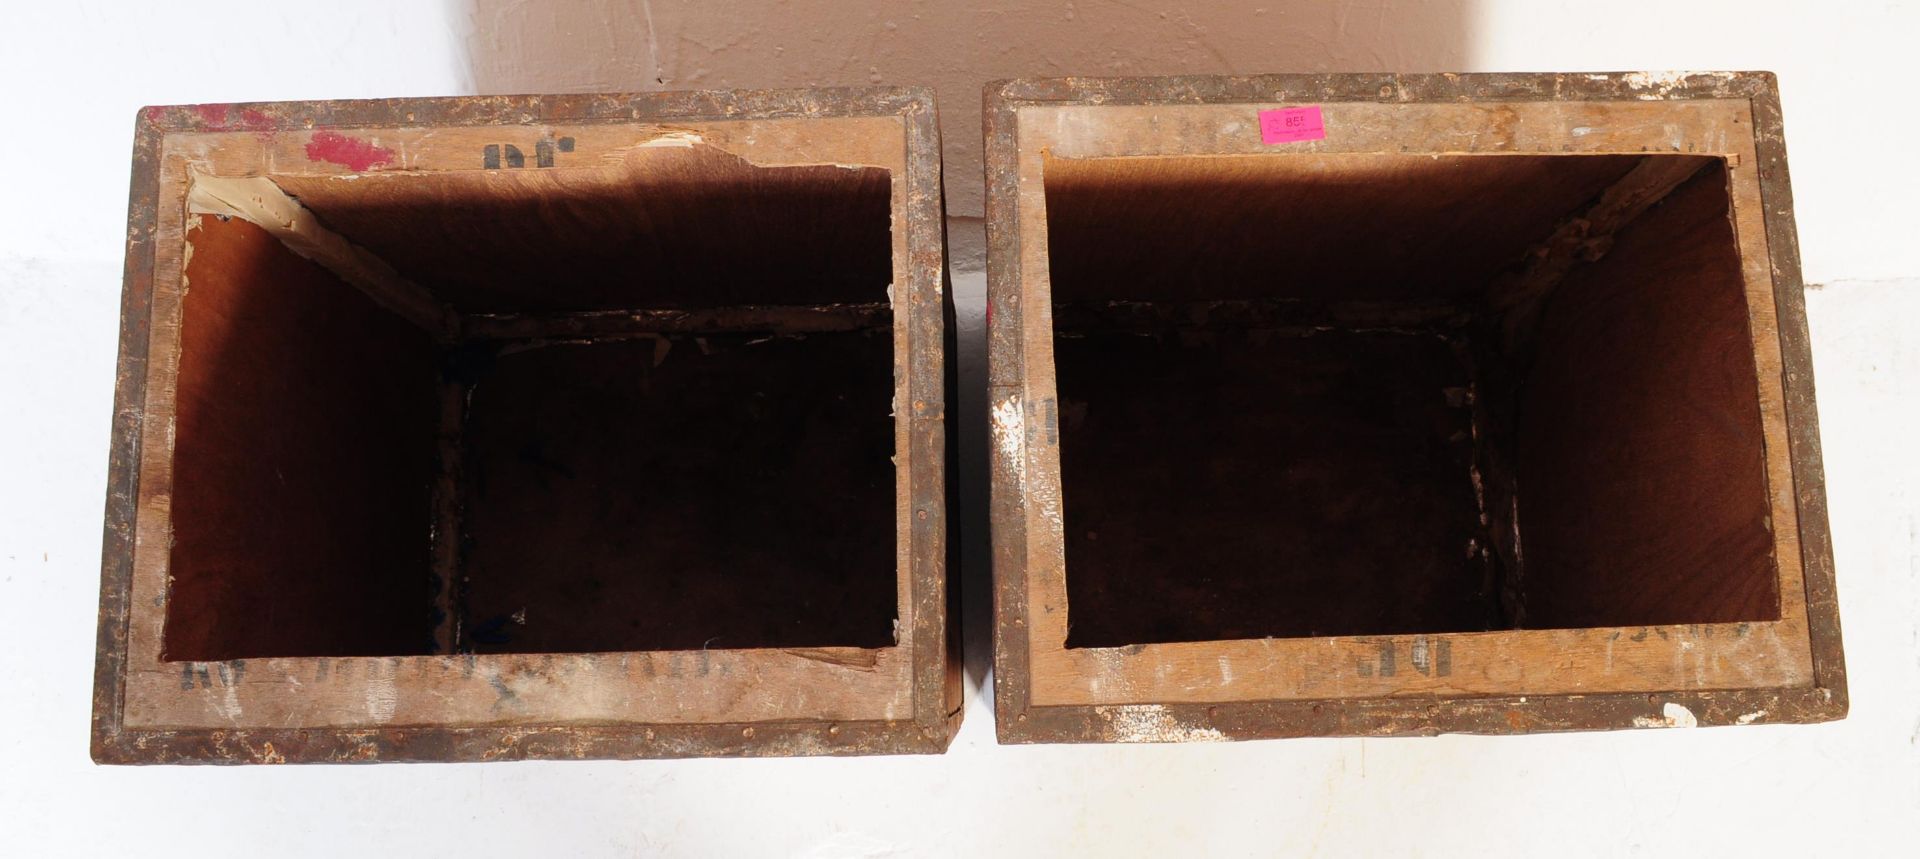 TWO MID 20TH CENTURY CIRCA 1940S TEA CHEST TRANSPORT CRATES - Image 3 of 5